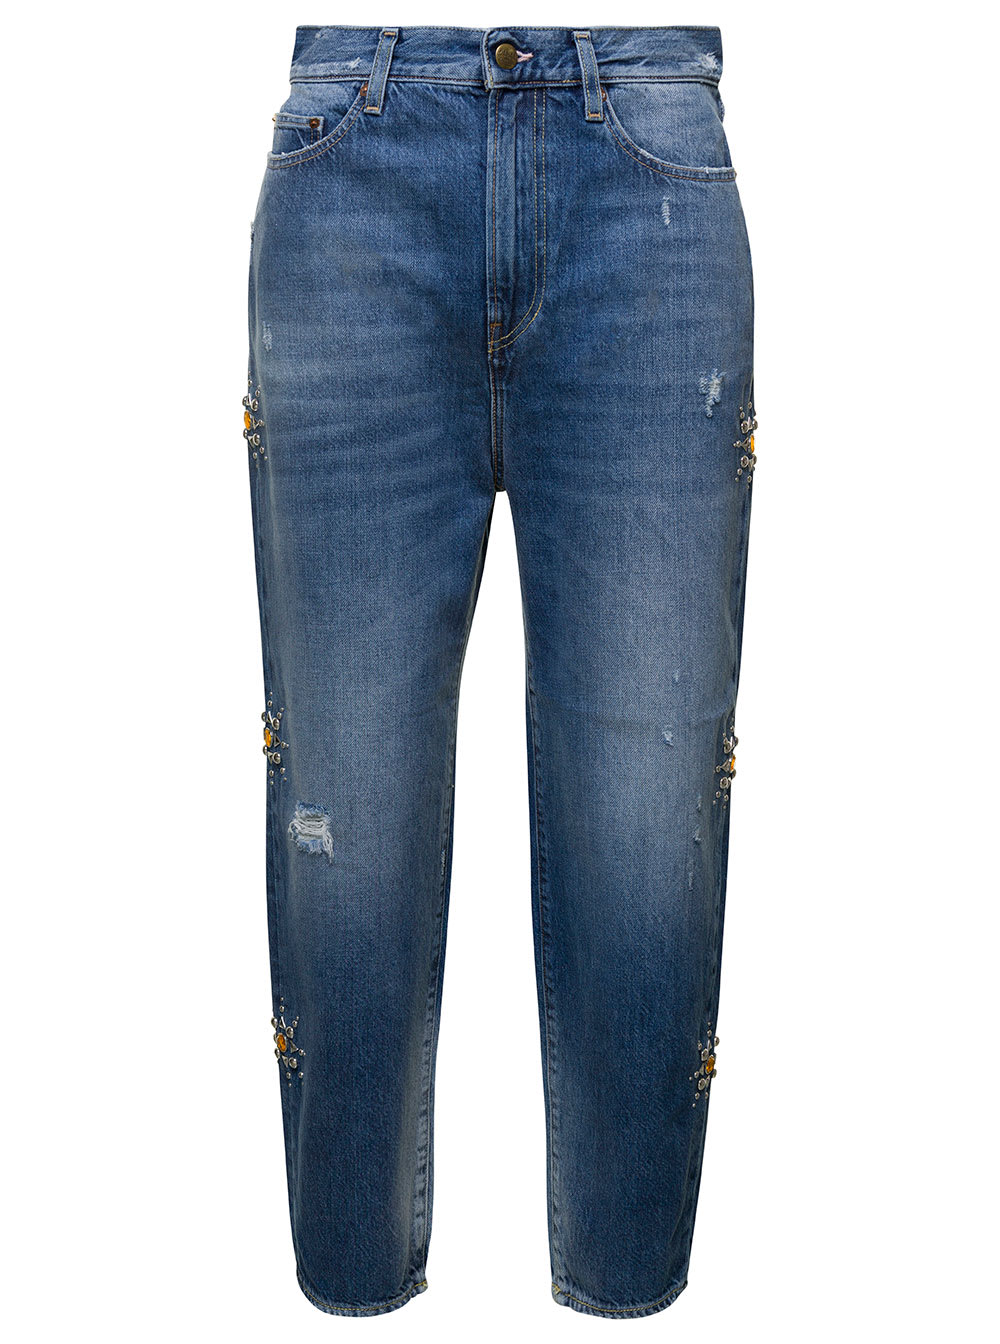 WASHINGTON DEE CEE BLUE DENIM HIGH WAISTED CROPPED JEANS IN COTTON WOMAN